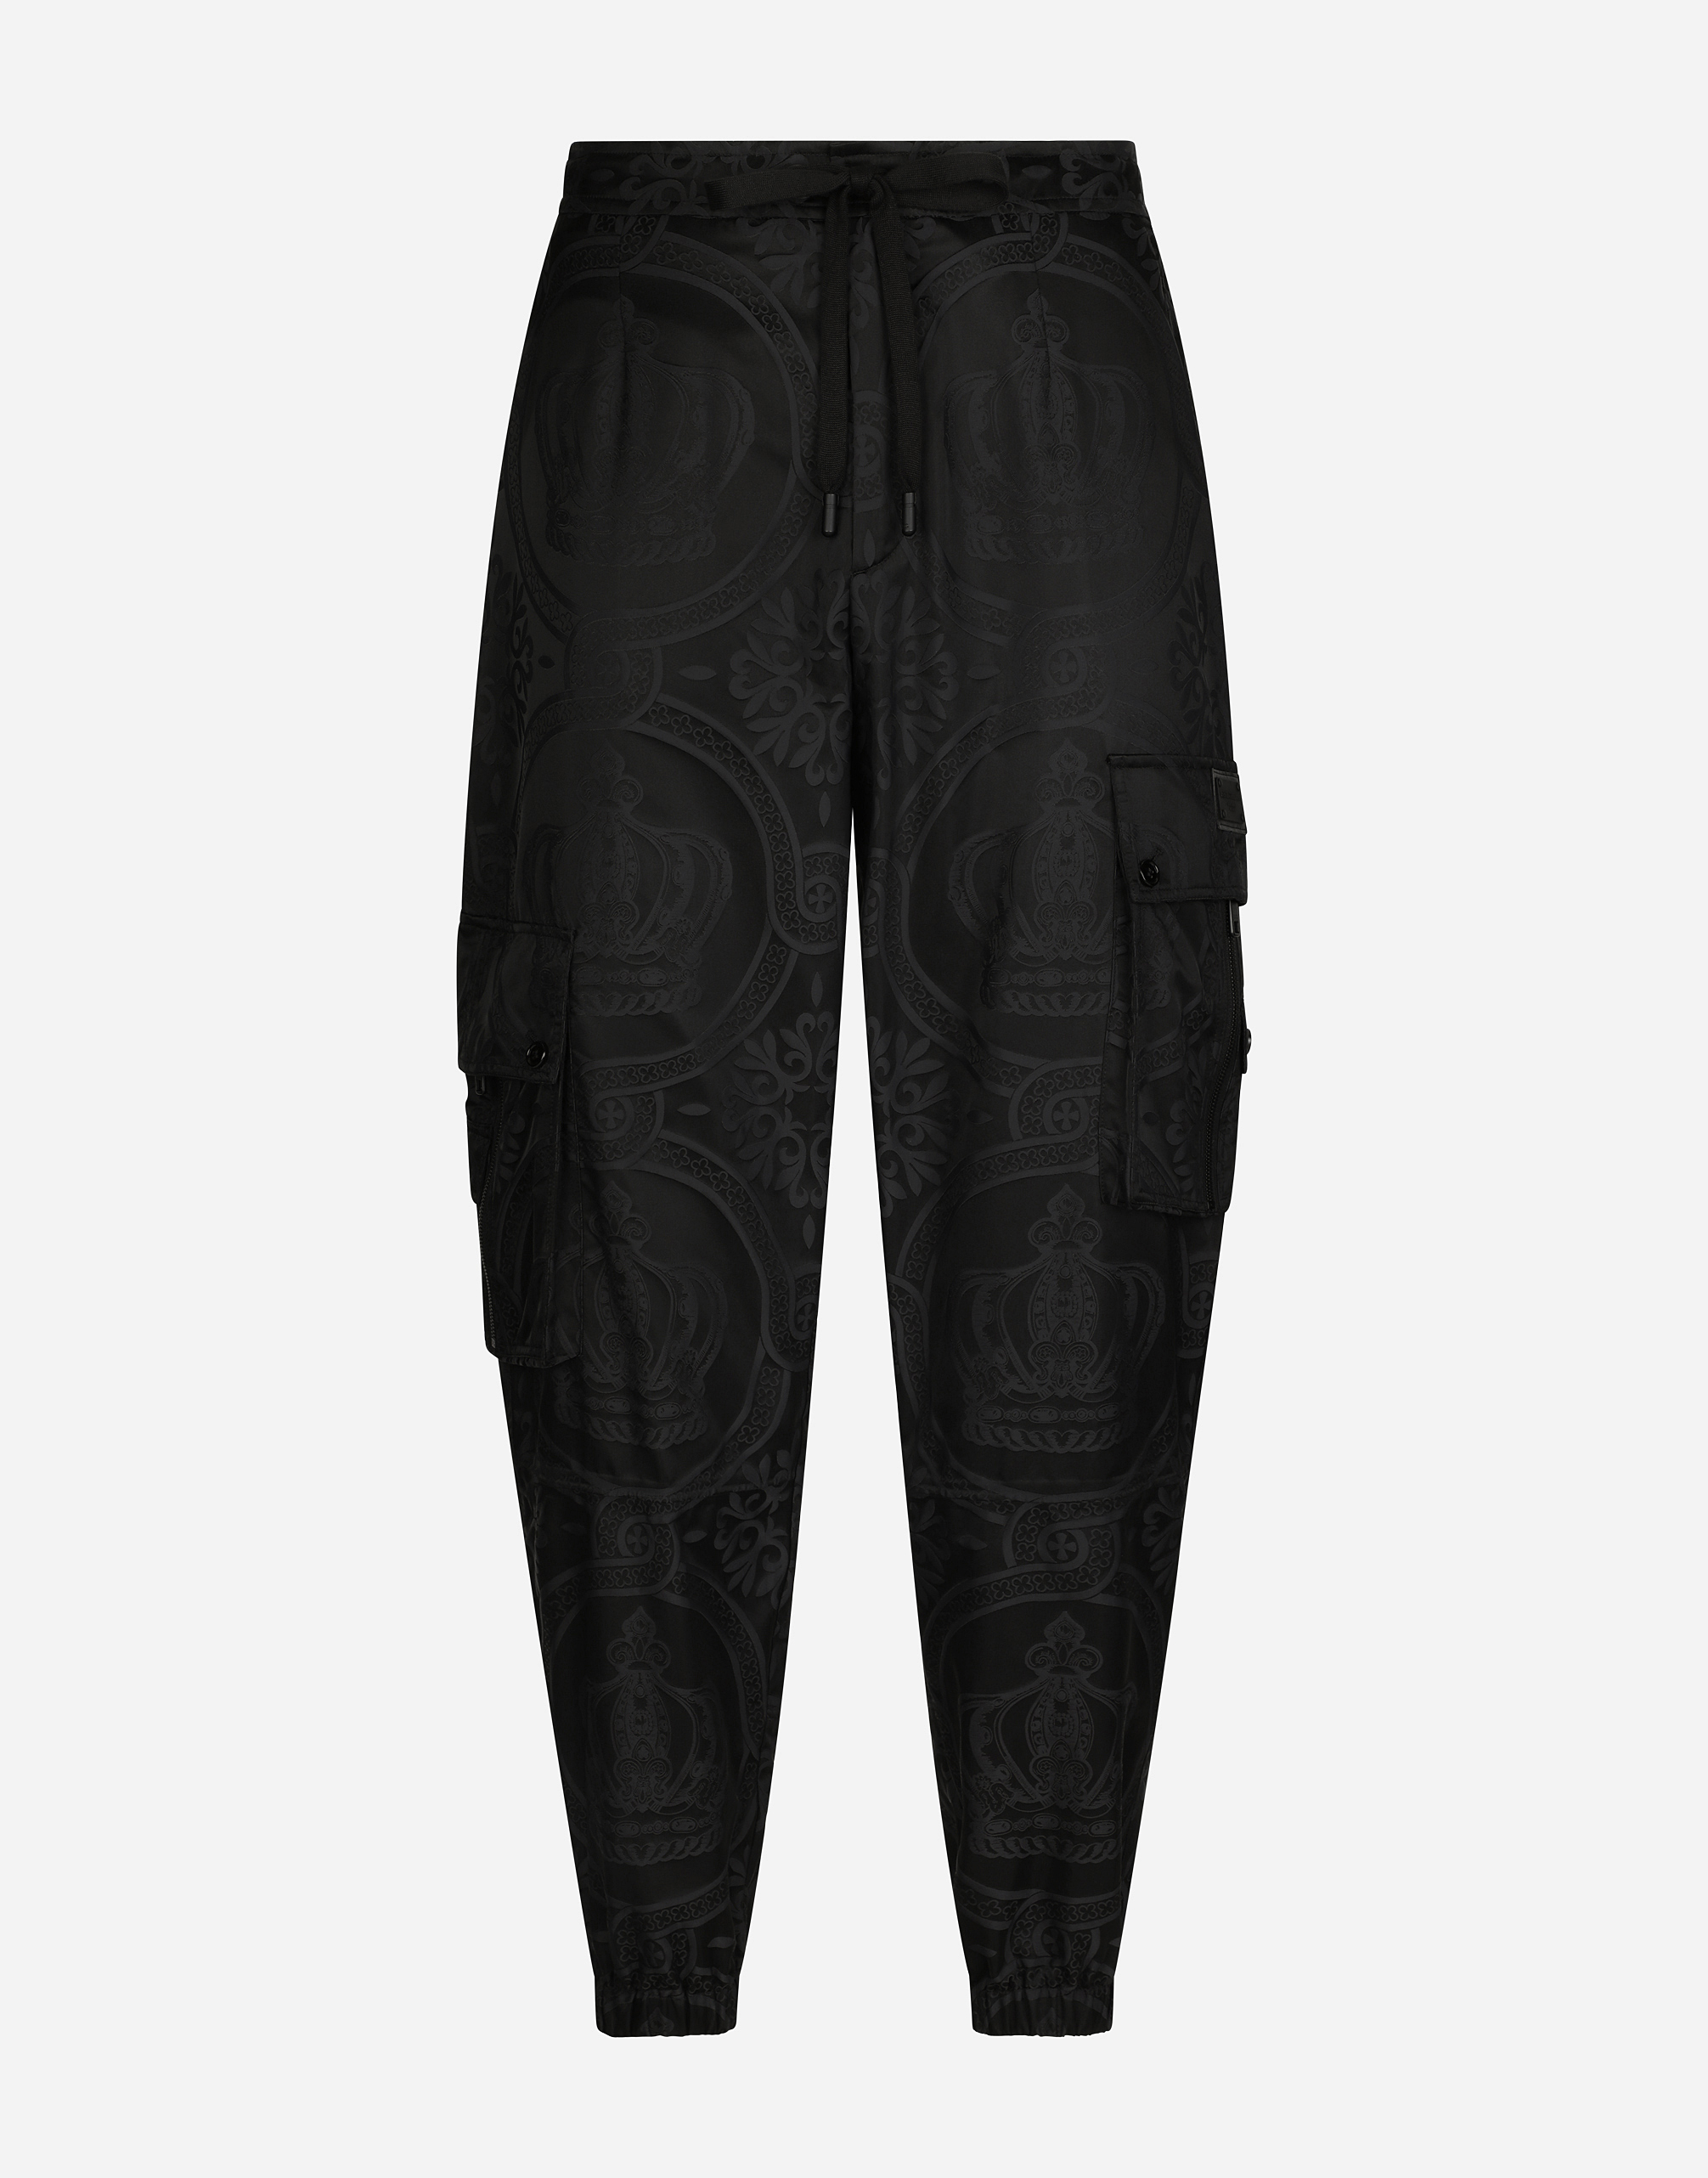 Crown-design nylon jacquard cargo pants with tag in Multicolor